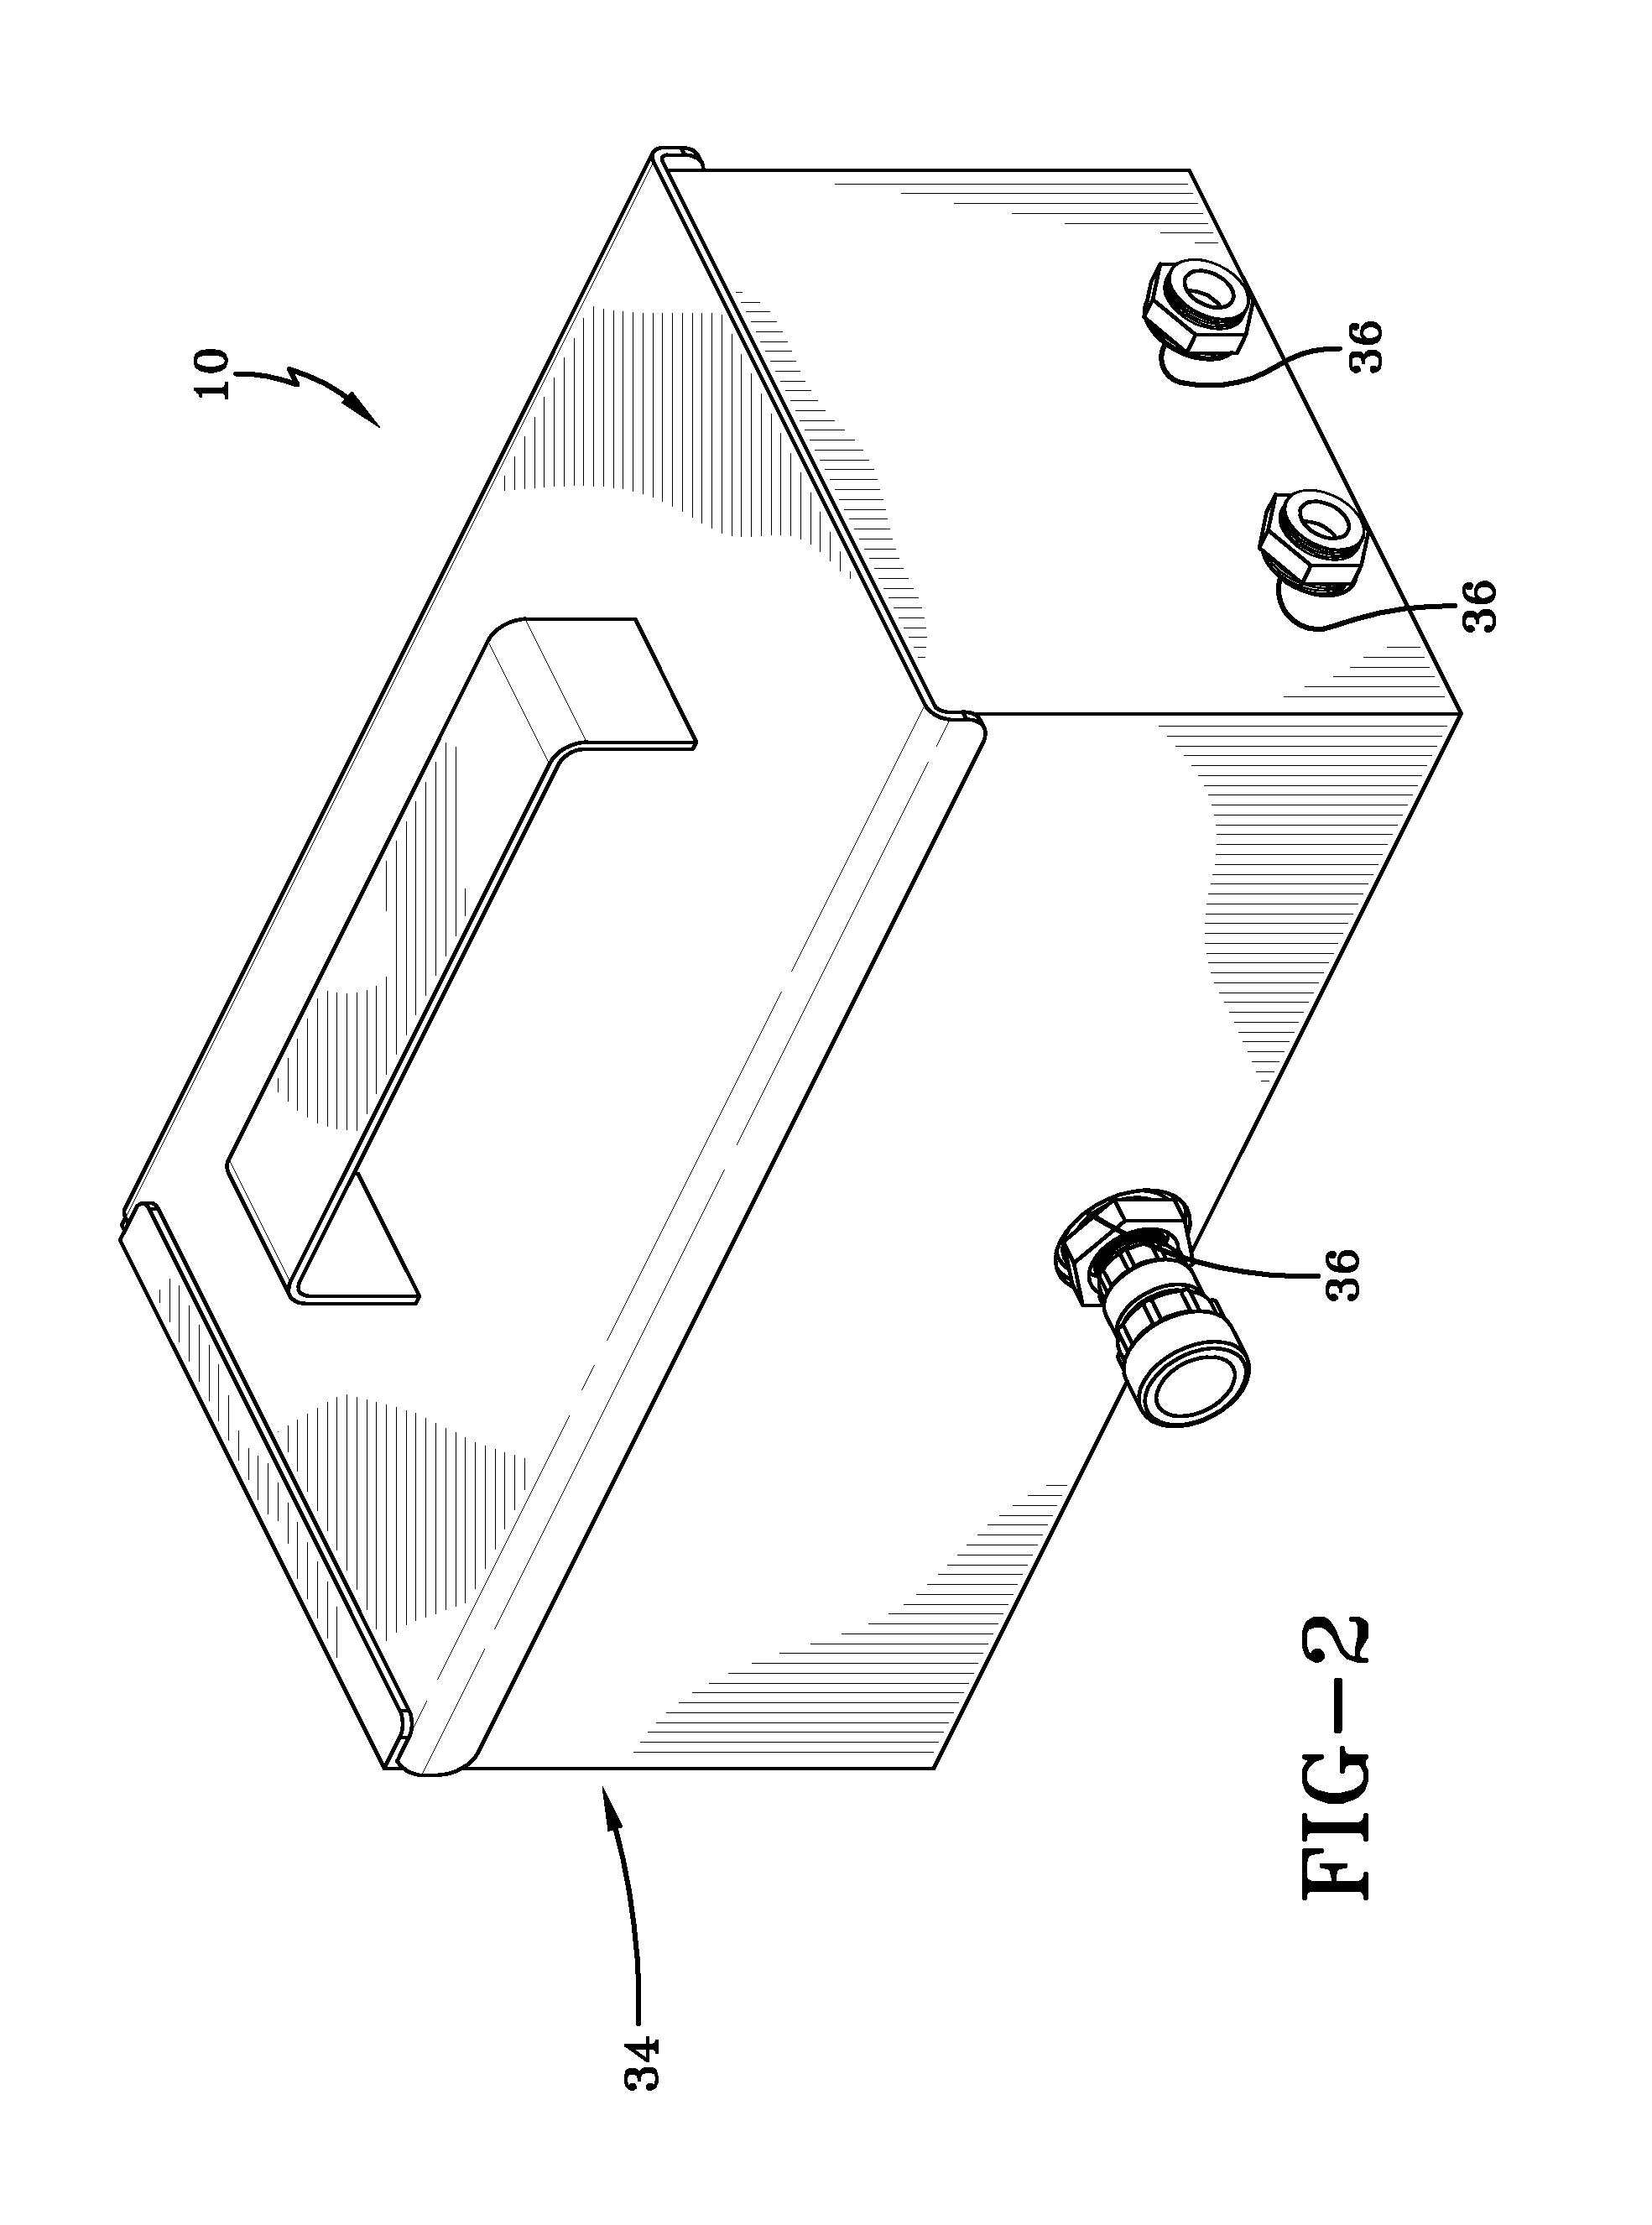 Lawn watering apparatus and method of use